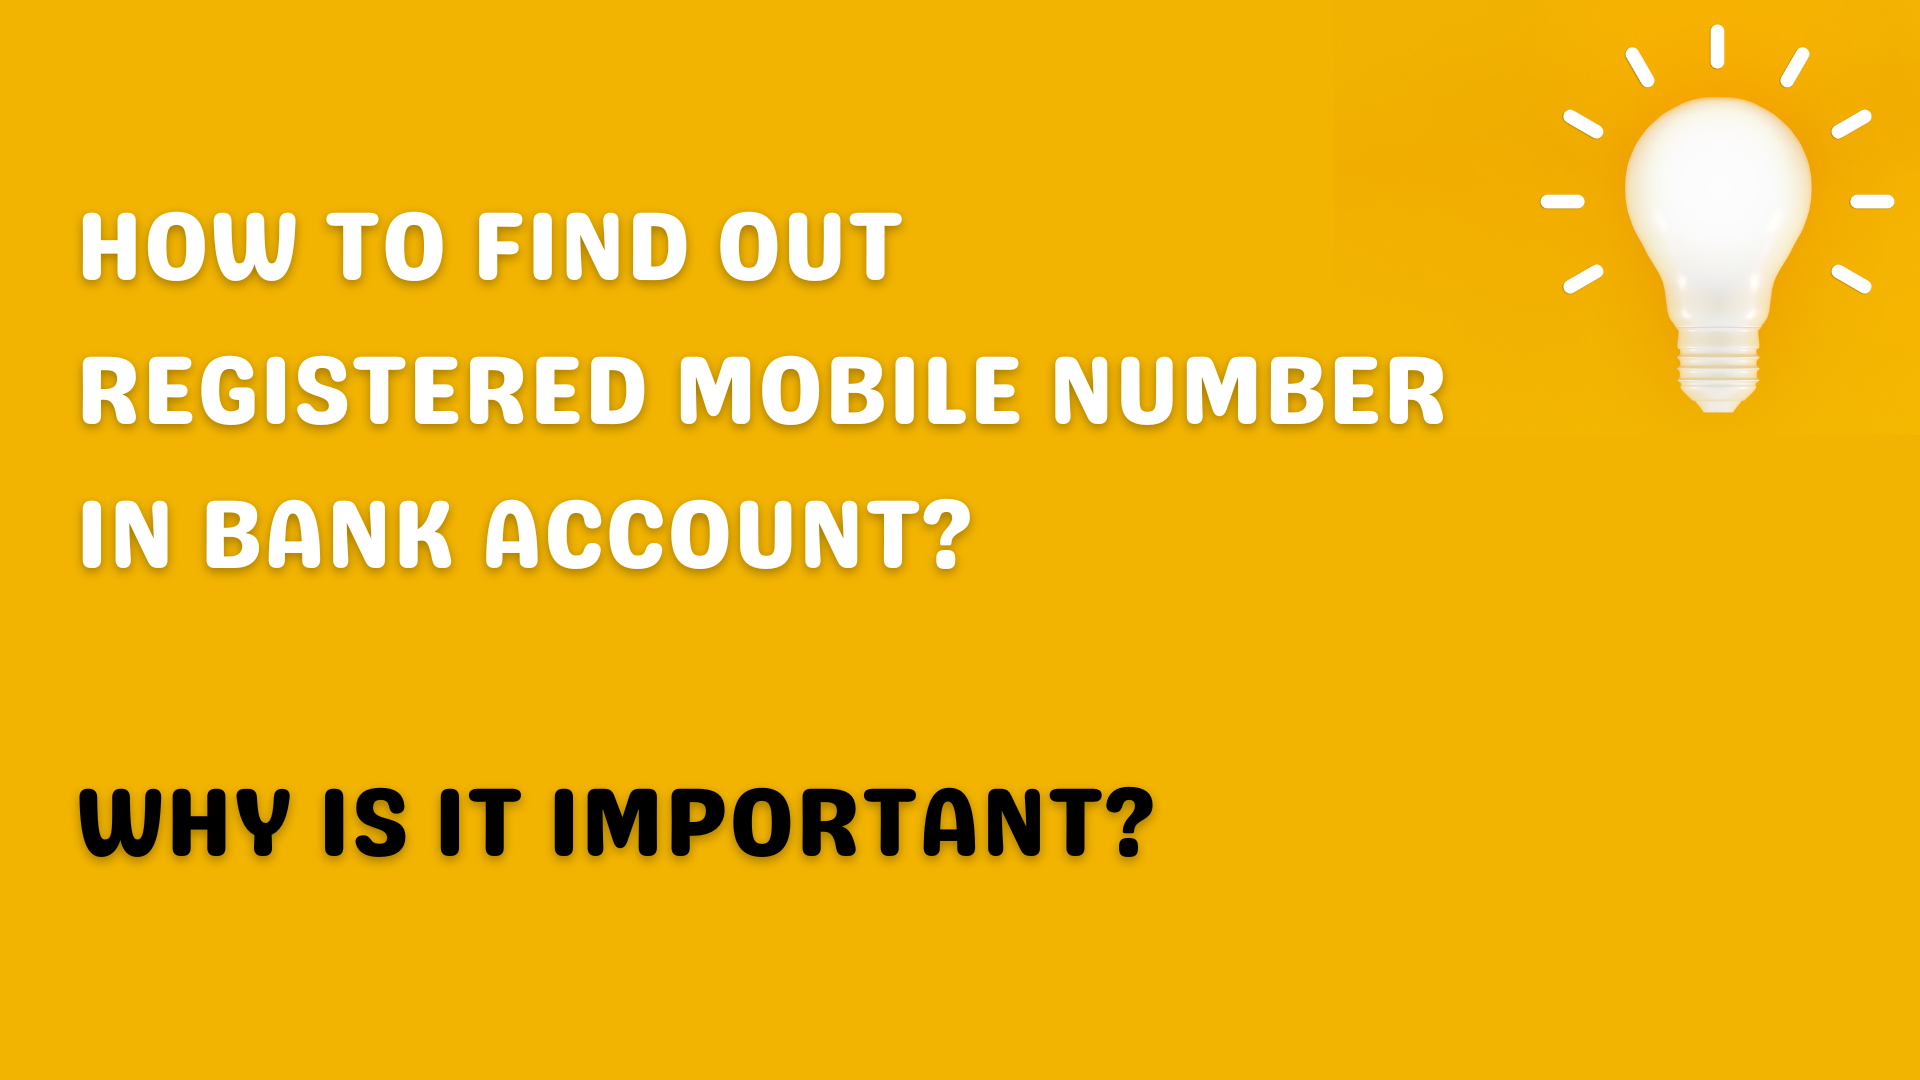 How To Find Out Registered Mobile Number In Bank Account? Why Is It Important?